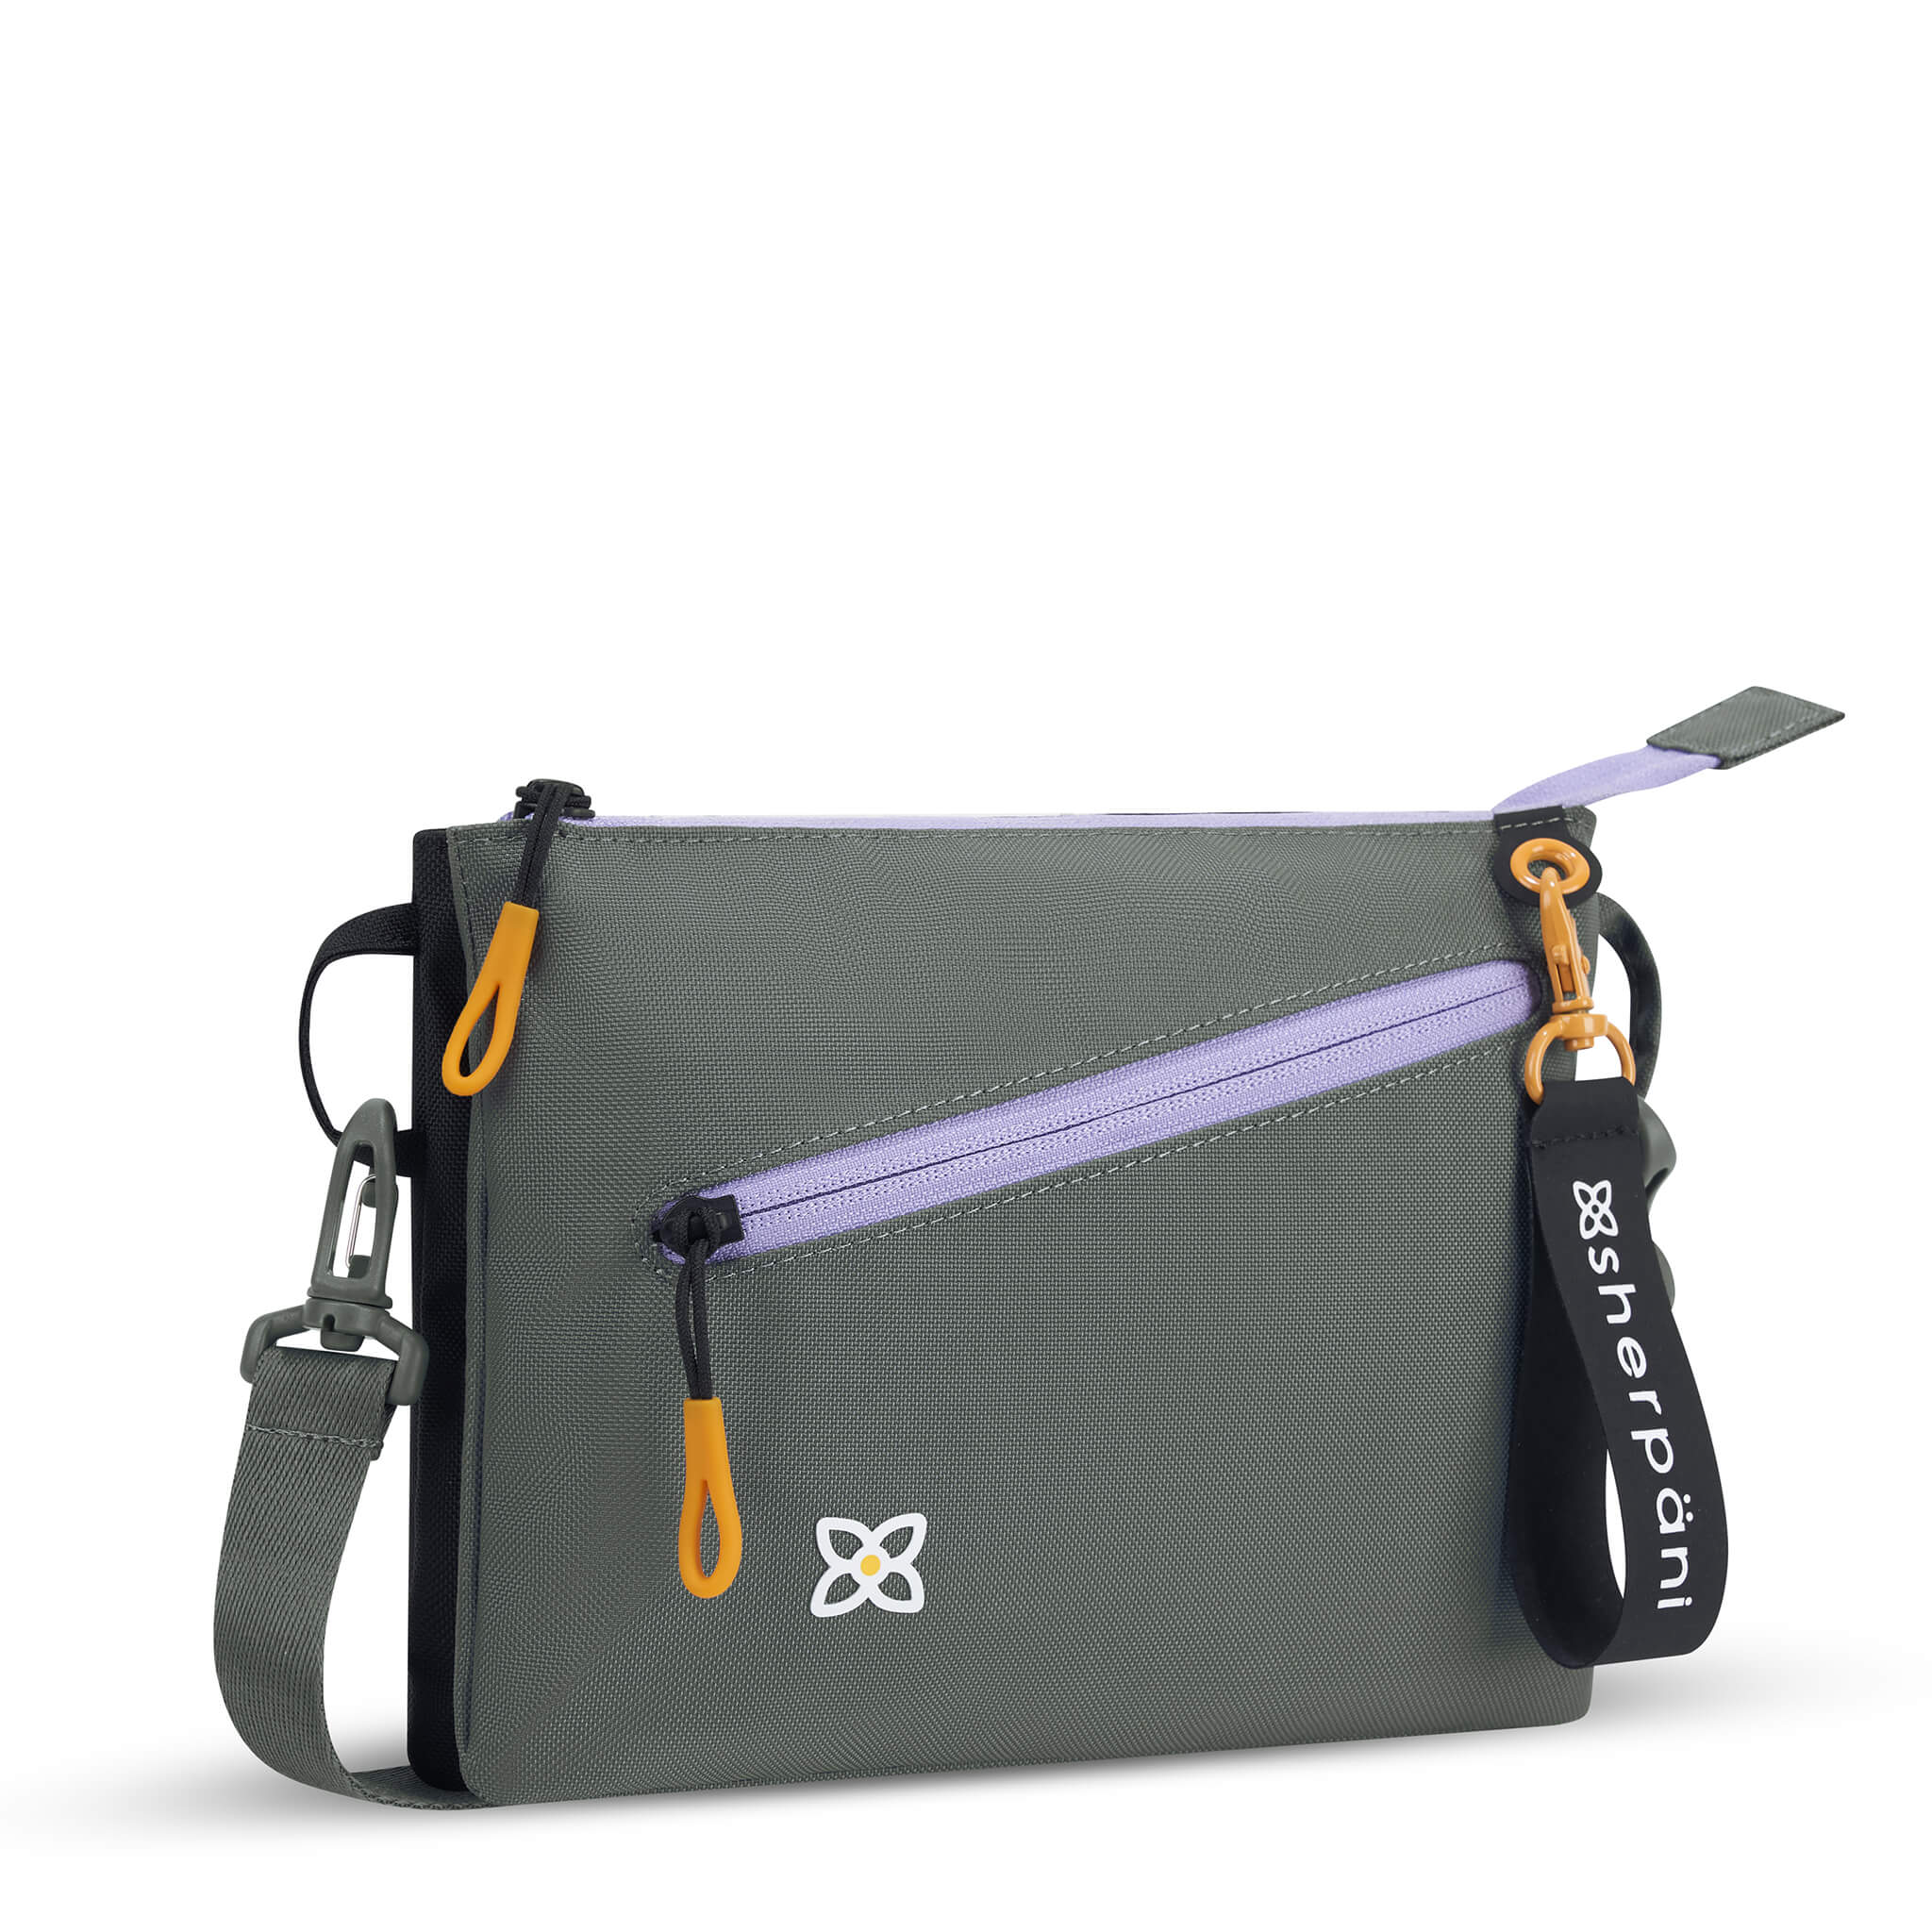 Angled front view of Sherpani small crossbody bag, the Zoom in Juniper. Special features of the Zoom include RFID protection, adjustable crossbody strap, removable strap, removable keychain, outside zipper pocket, internal divider, internal zipper pockets and back slip pocket. The Juniper color is two-toned in gray and black with accents in yellow and purple. #color_juniper